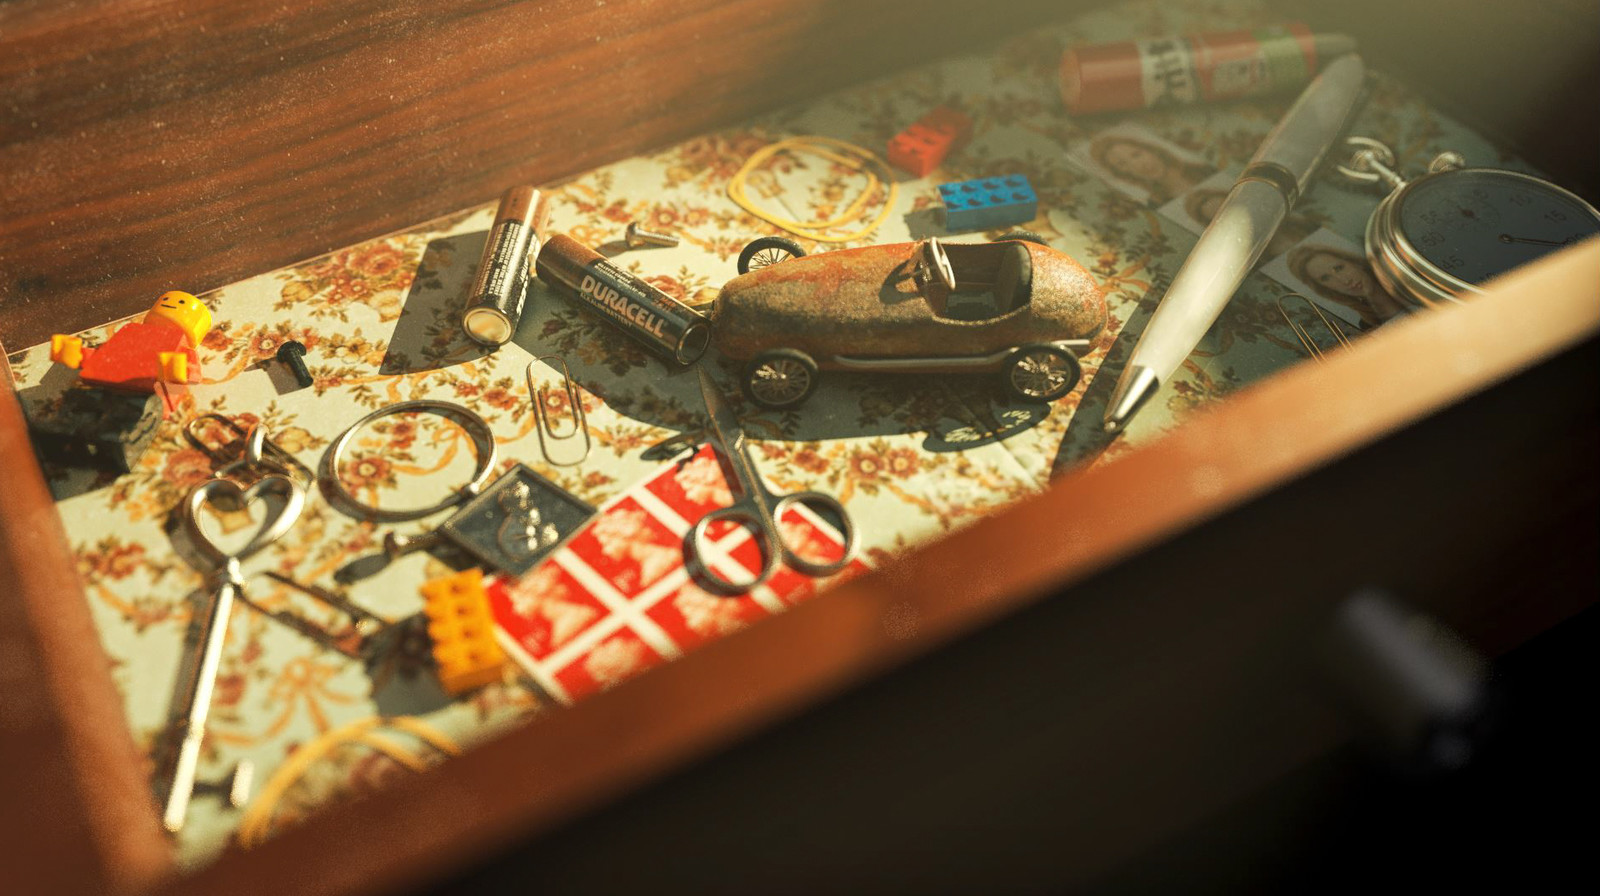 "MEMORY LANE" OLD MISCELLANEOUS DRAWER / REDSHIFT - CINEMA 4D